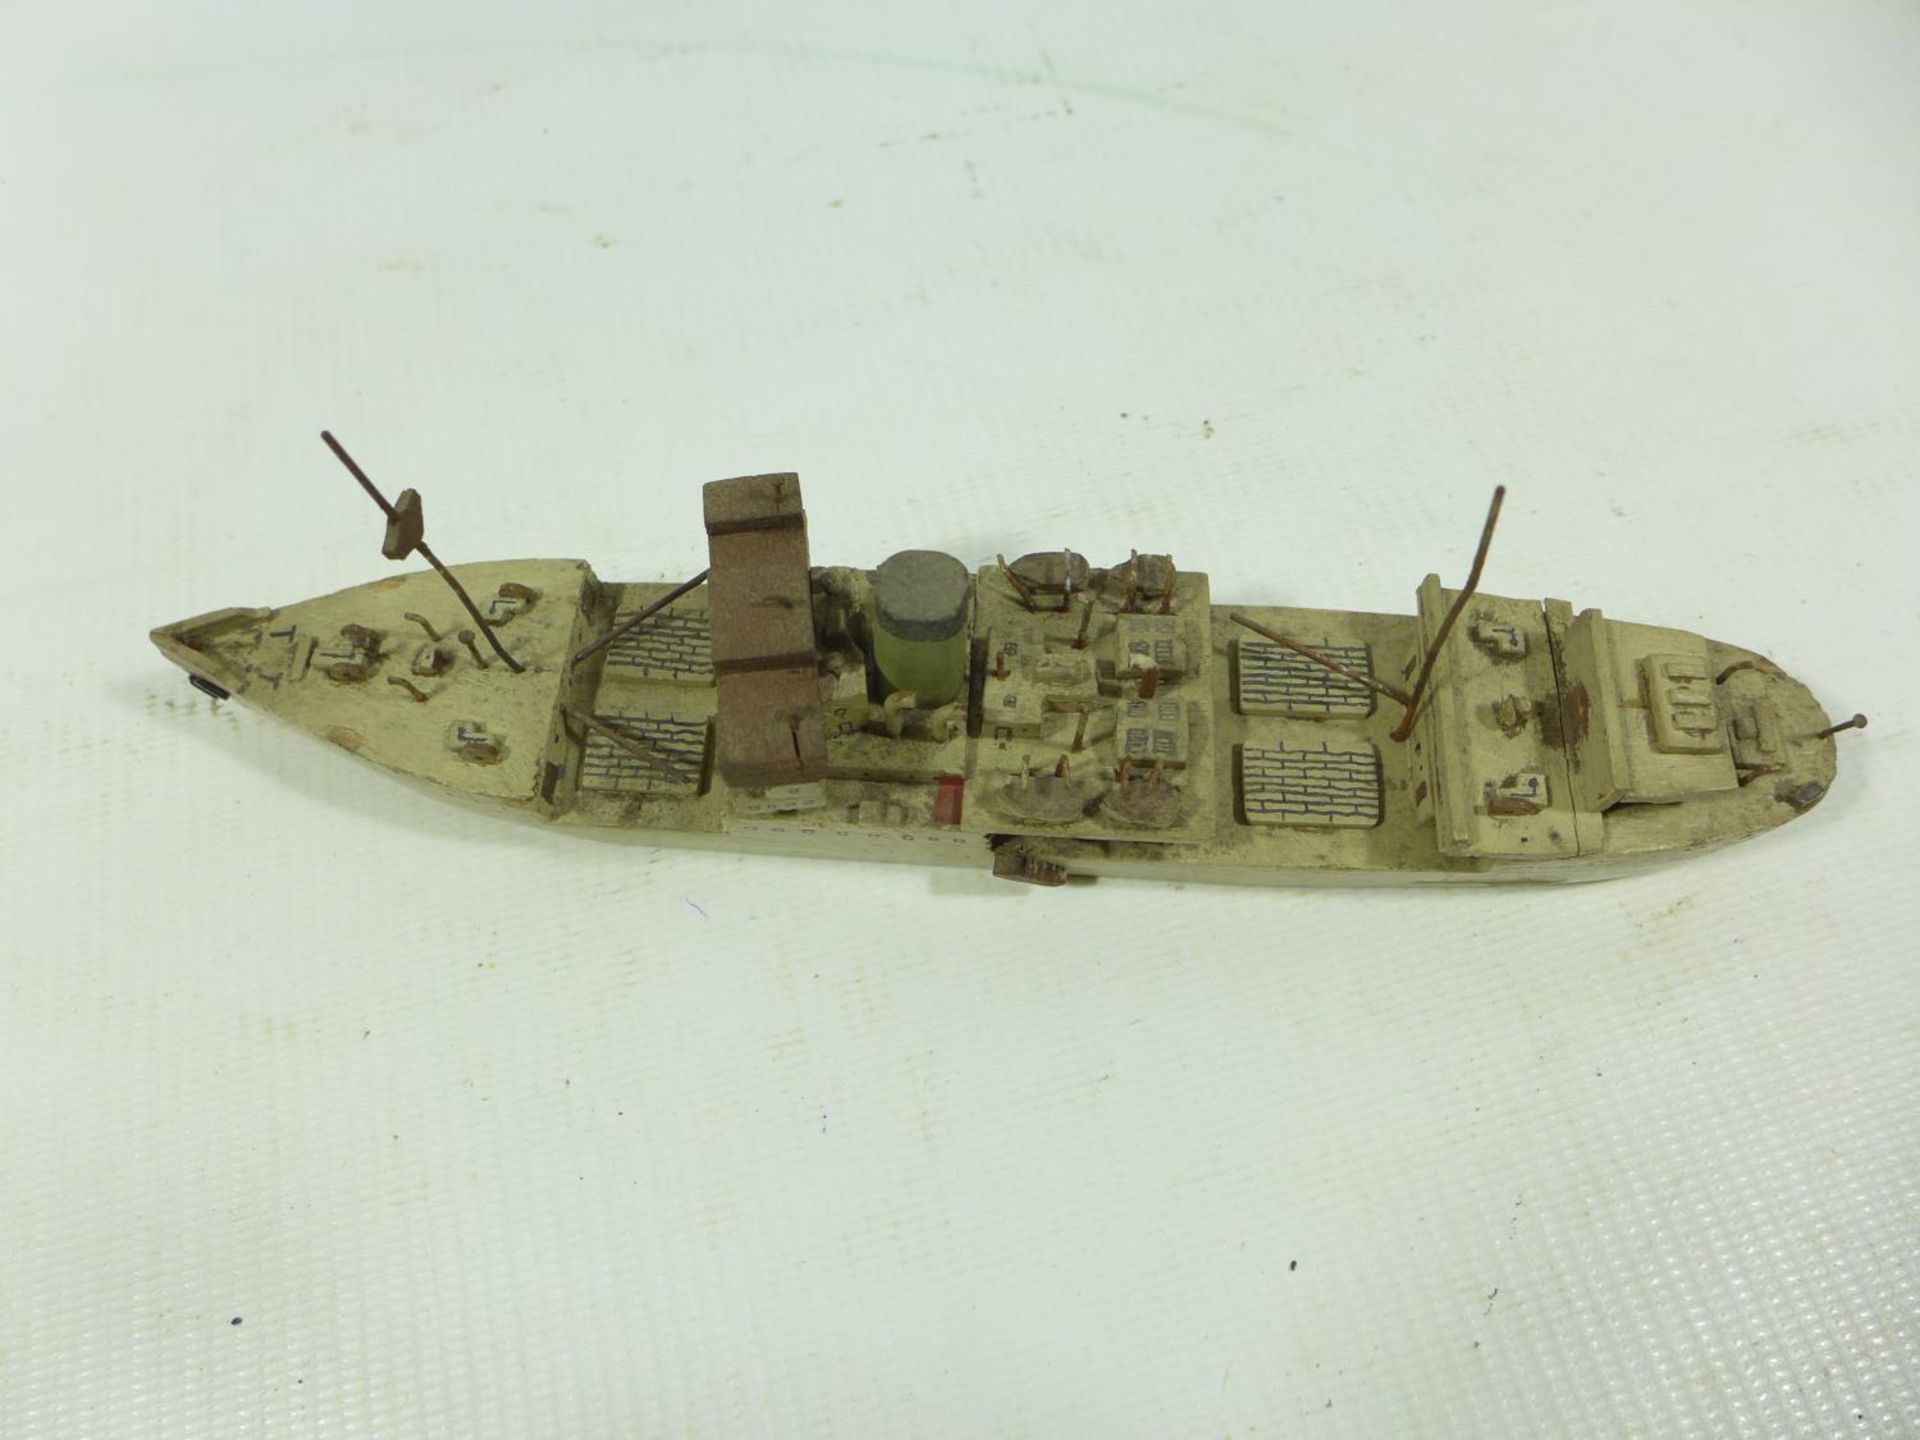 A MODEL OF THE SHIP 'JAMAICA PRODUCER' DATED 1946, LENGTH 21CM, TEAK BARREL FROM HMS AJAX, IRON BALL - Image 3 of 6